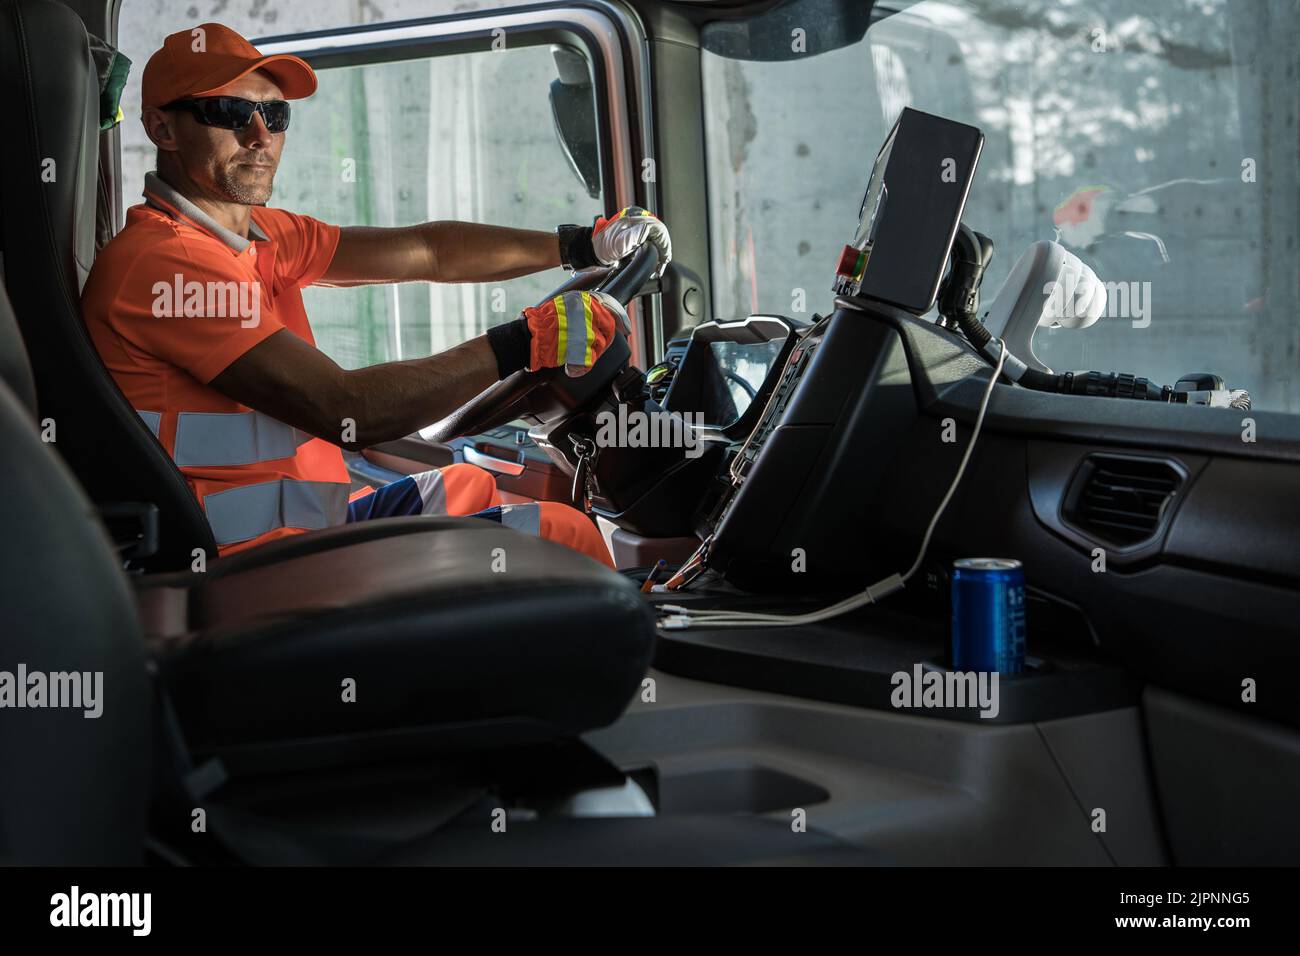 Modern Caucasian Garbage Truck Driver Behind the Wheel. Waste Transport and Management Industry Job. Trash Sorting Facility Delivery. Stock Photo